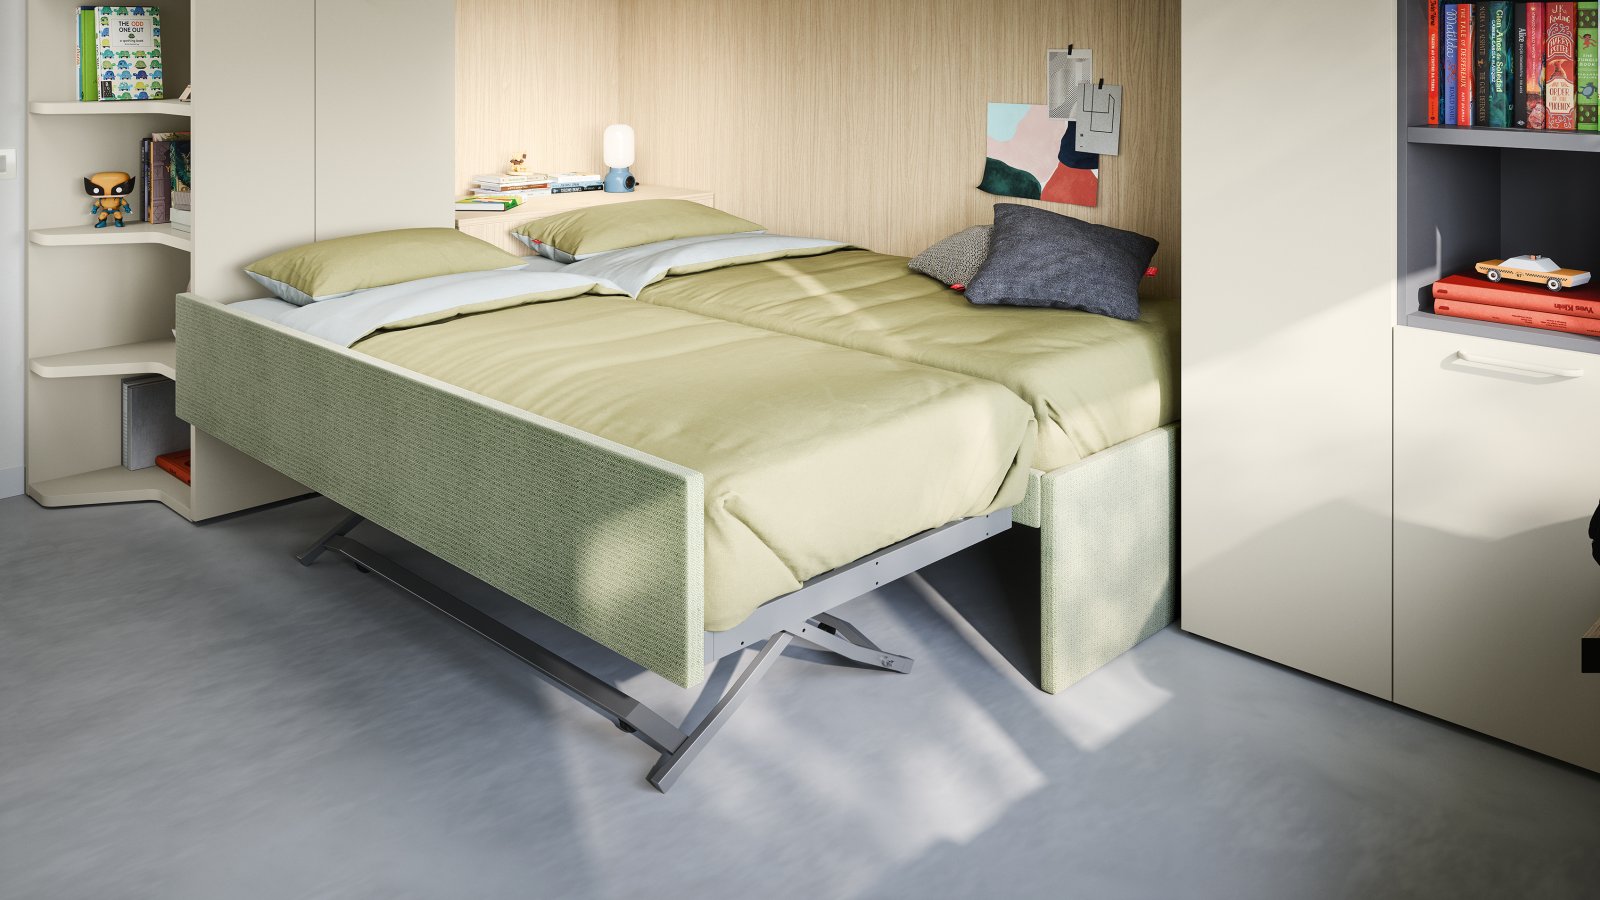 Equipped platform bed